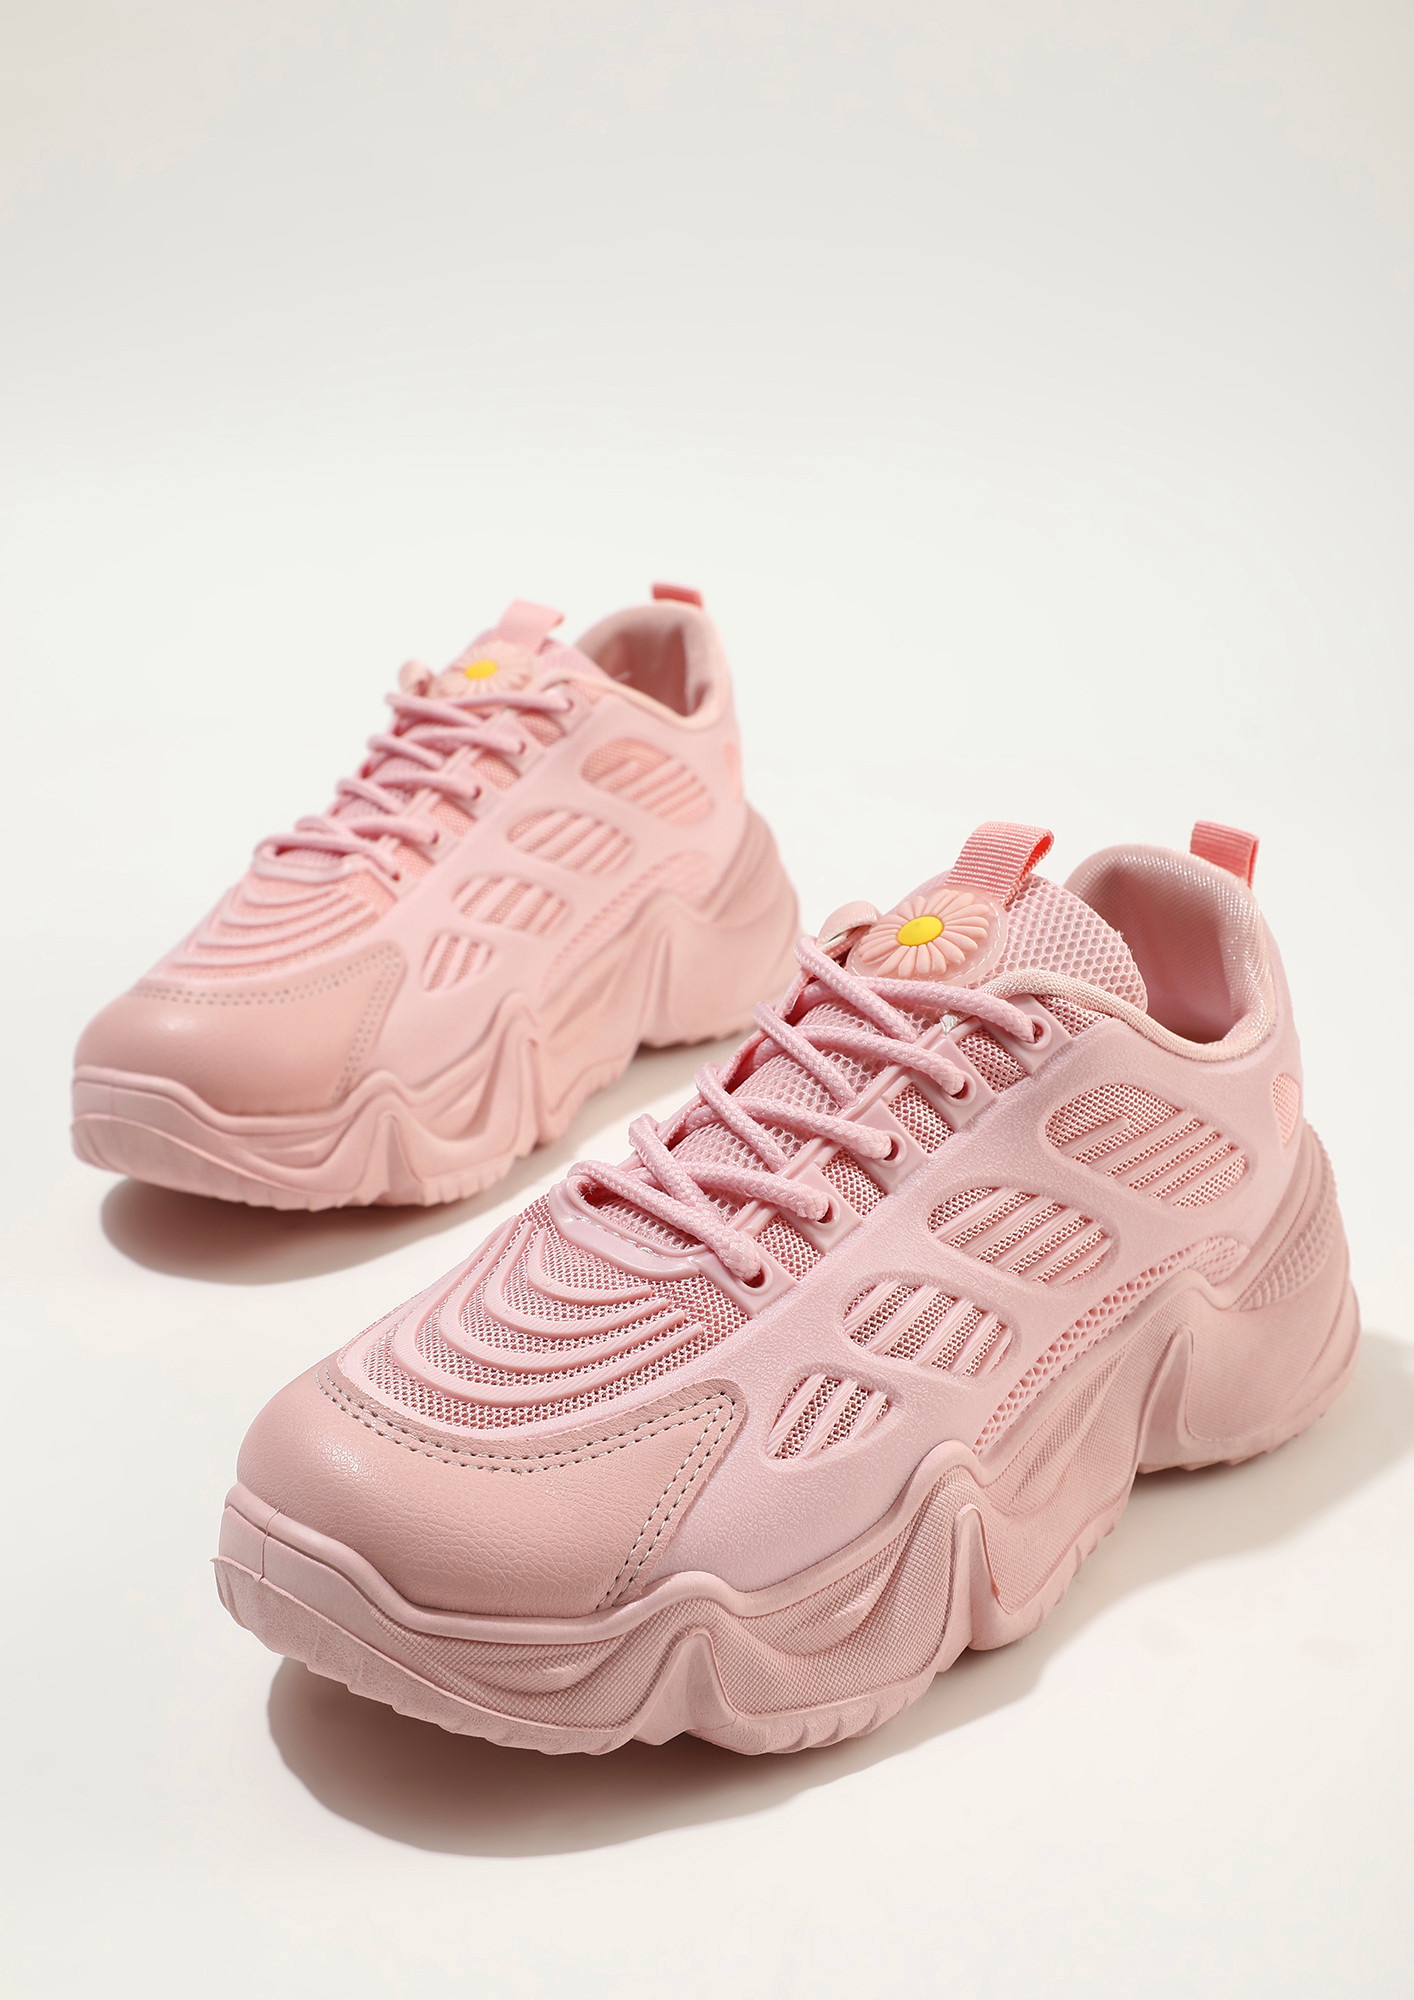 TO THE TOP PINK TRAINERS